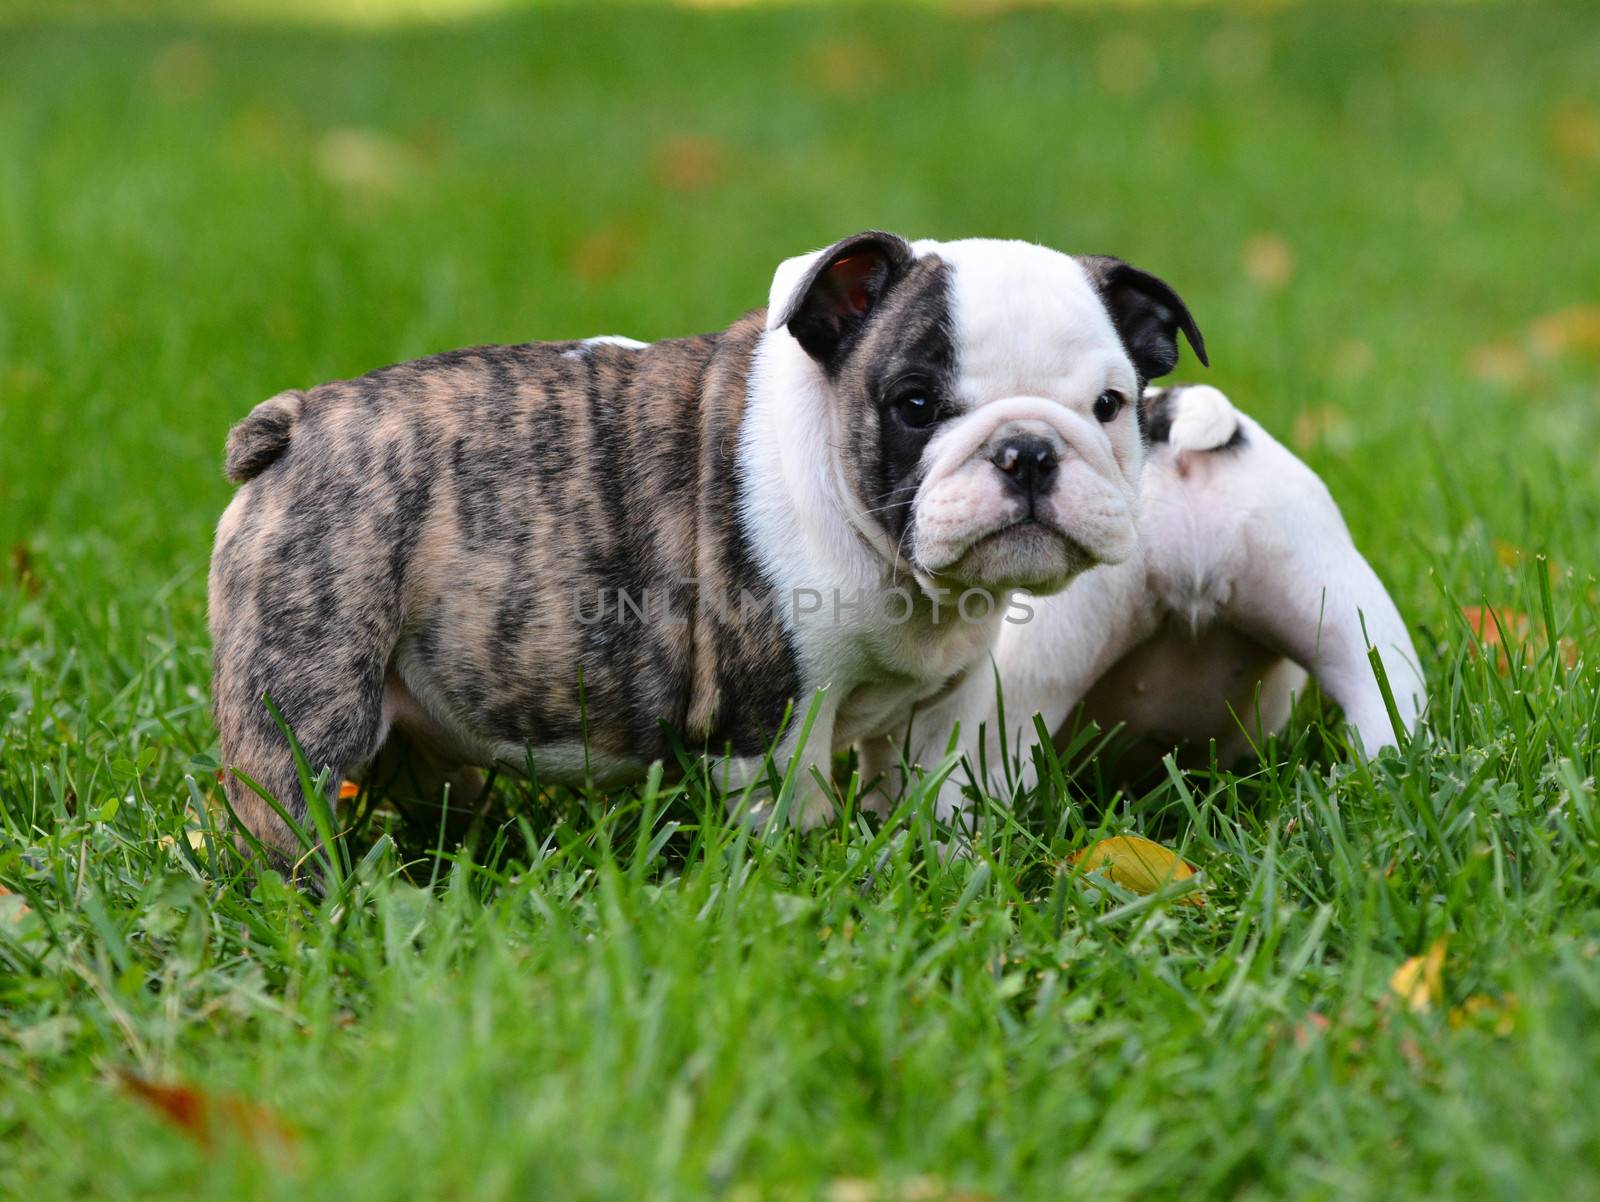 bulldog puppy playing outside 8 weeks old